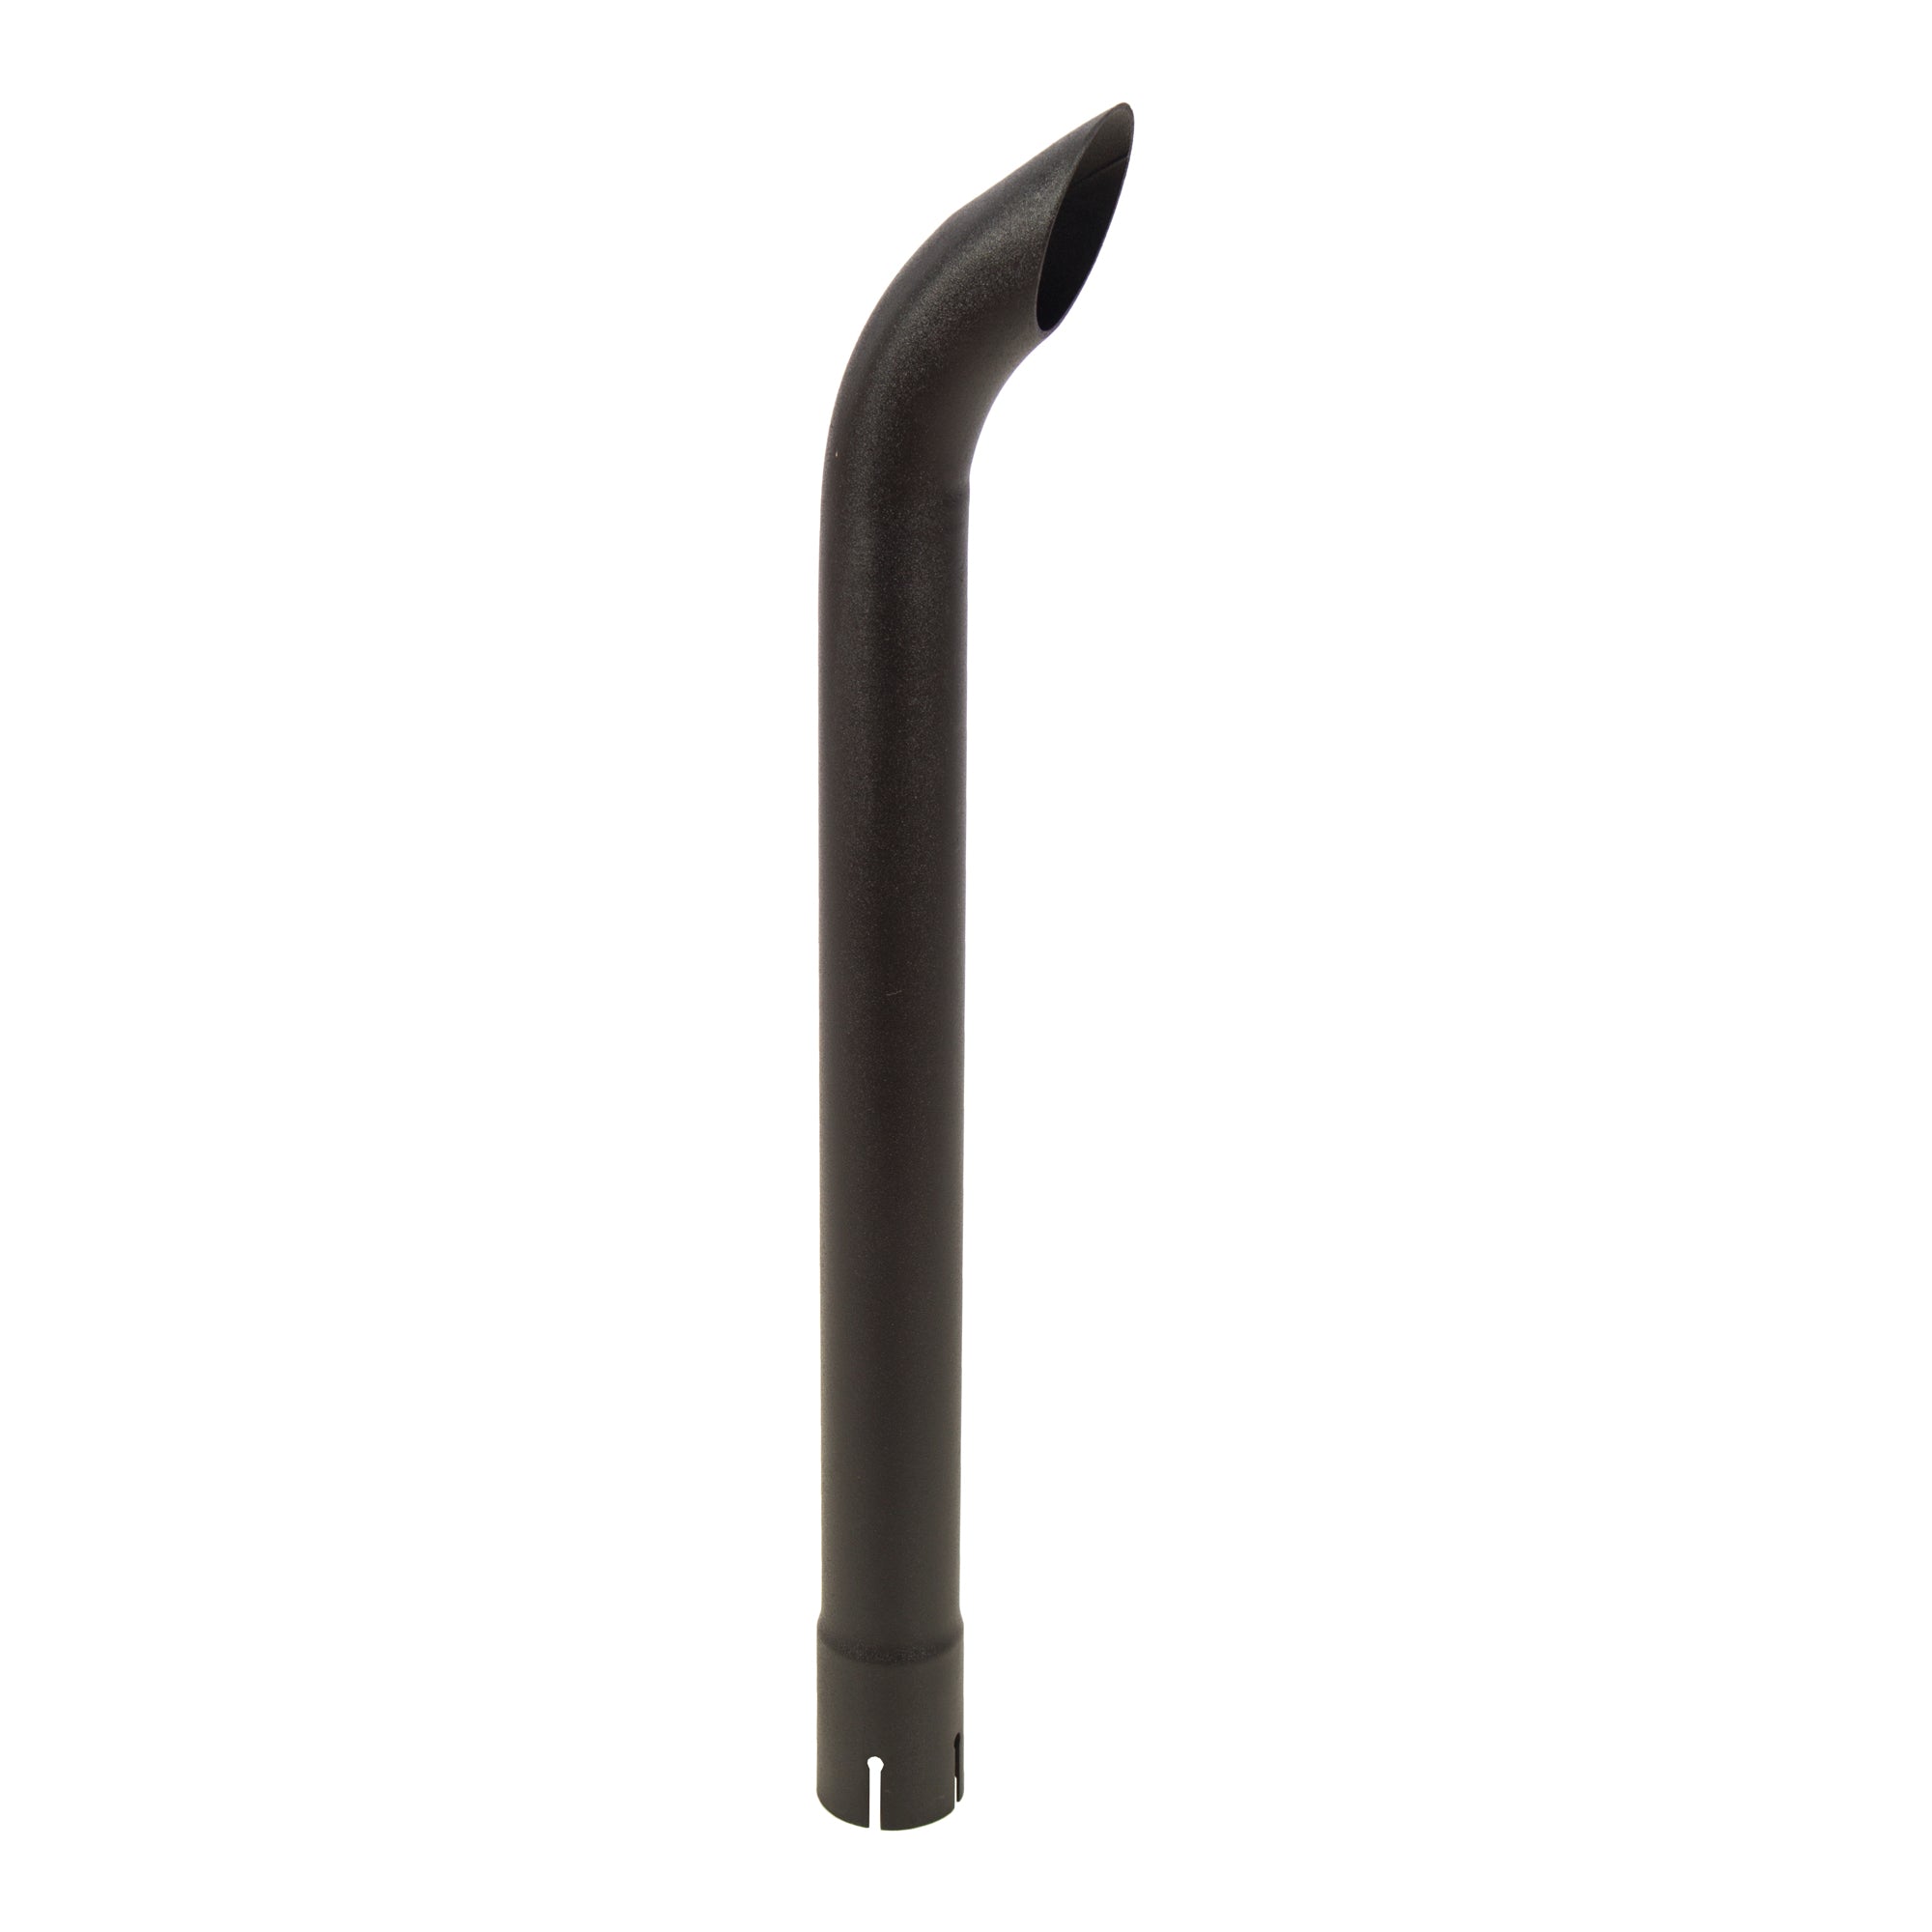 Exhaust Stack Pipe Replacement for UNIVERSAL  - 1-7/8" x 24", Curved Black